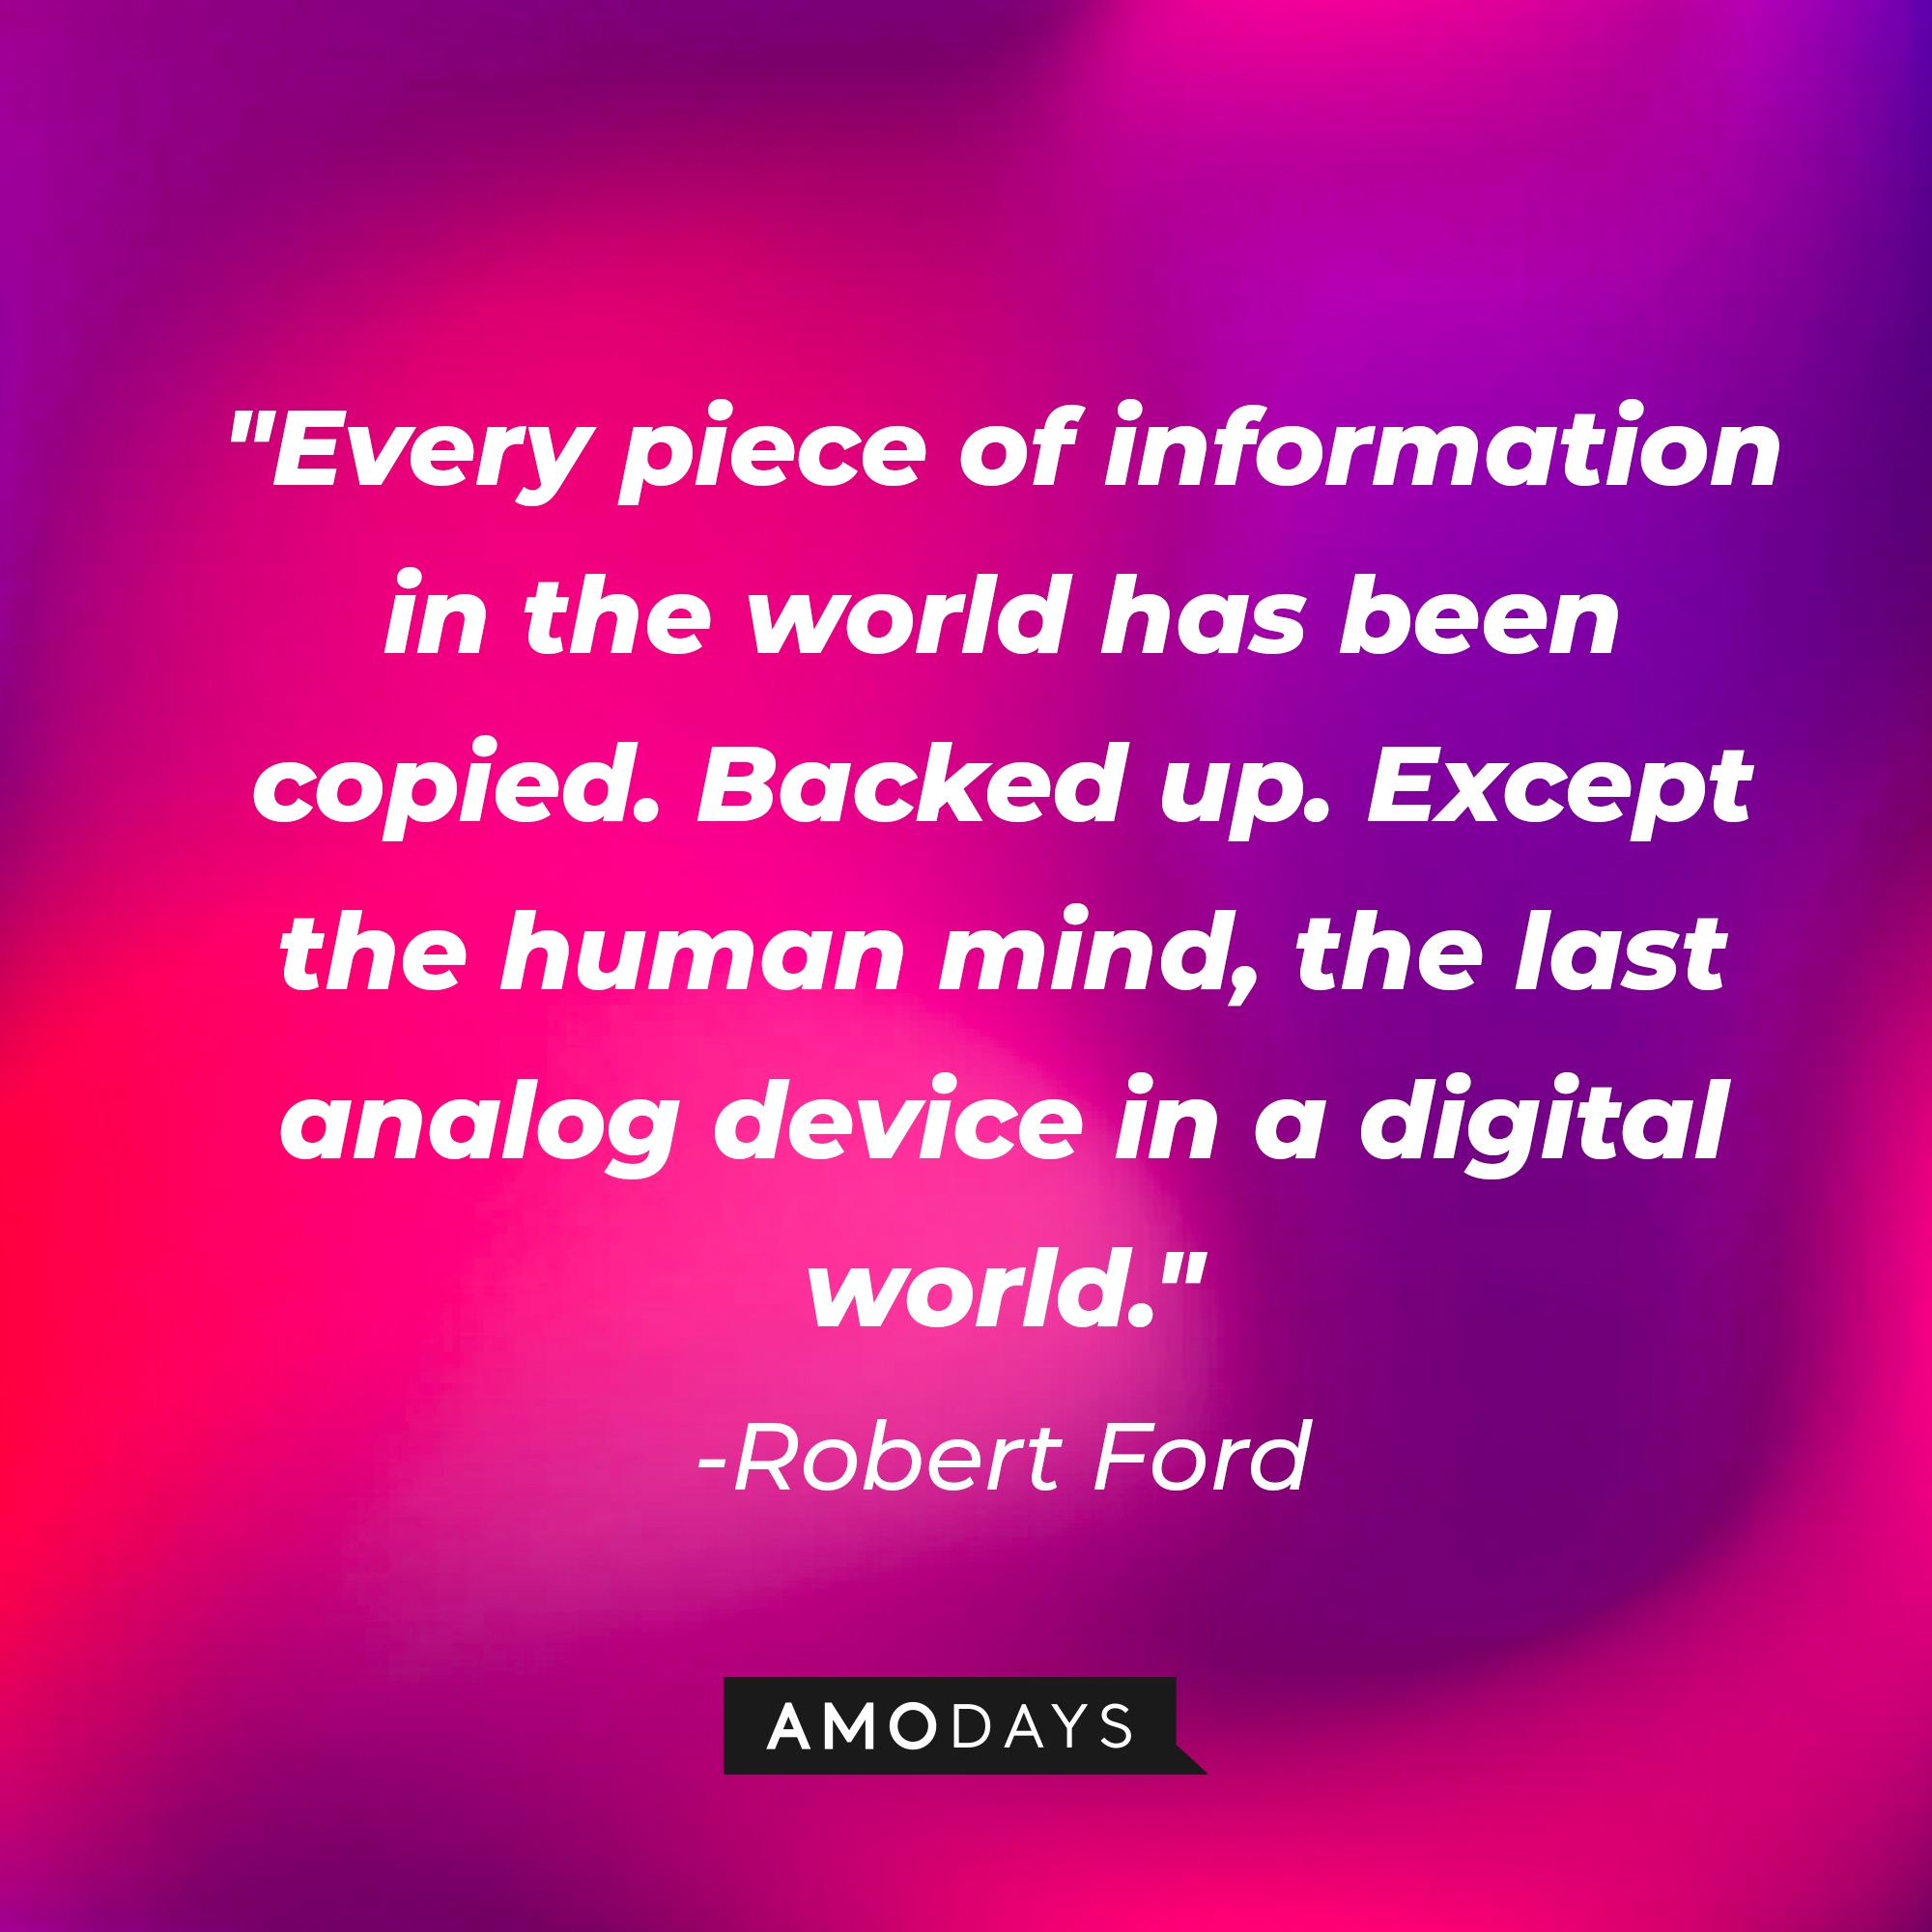 Robert Ford's quote: "Every piece of information in the world has been copied. Backed up. Except the human mind, the last analog device in a digital world." | Source: AmoDays